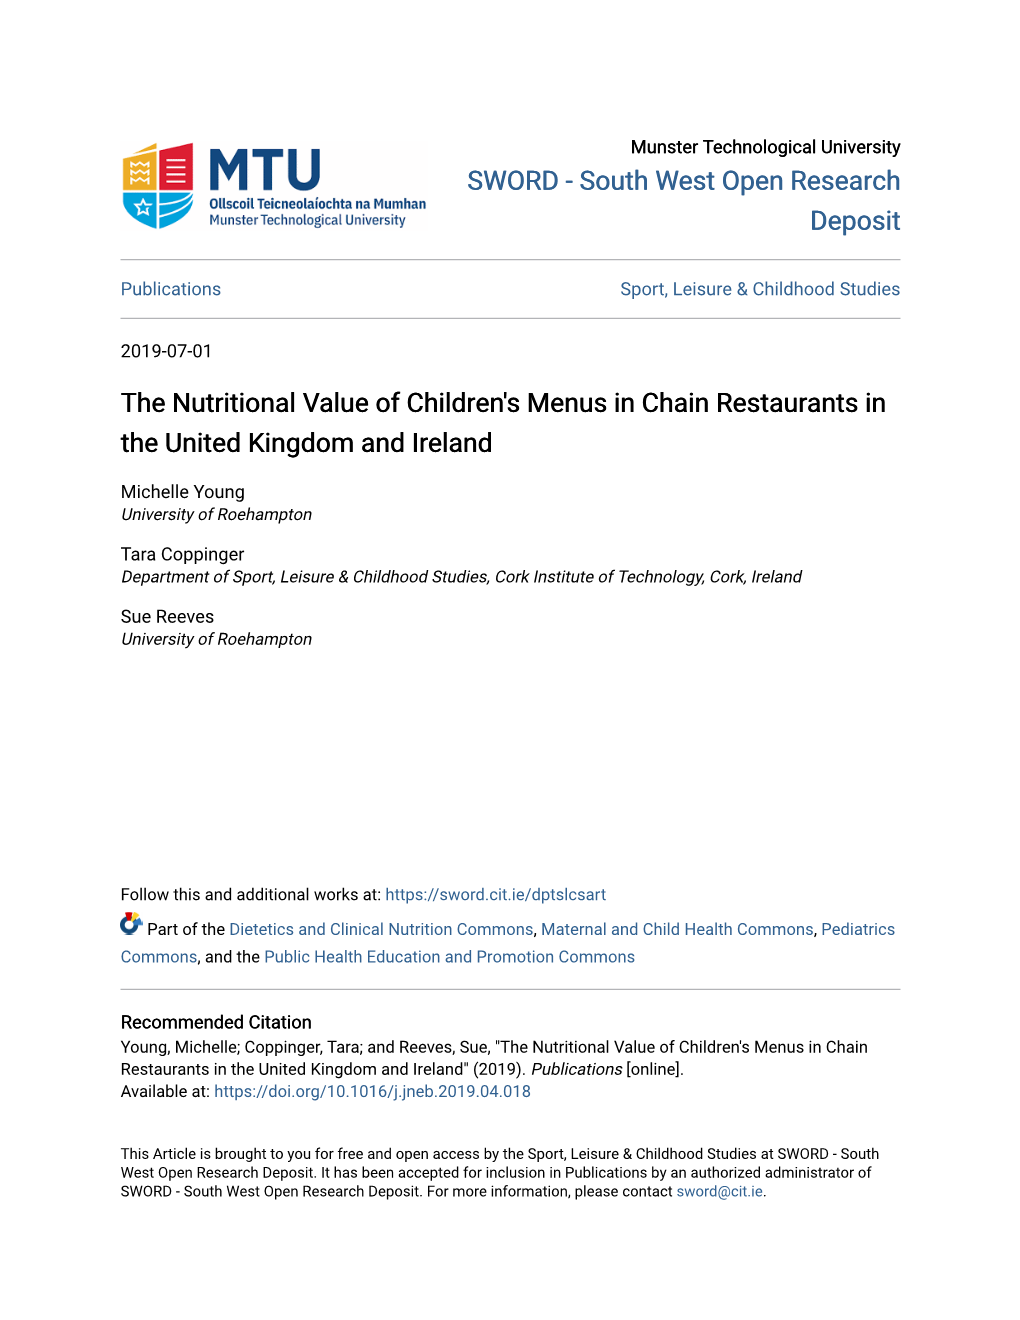 The Nutritional Value of Children's Menus in Chain Restaurants in the United Kingdom and Ireland